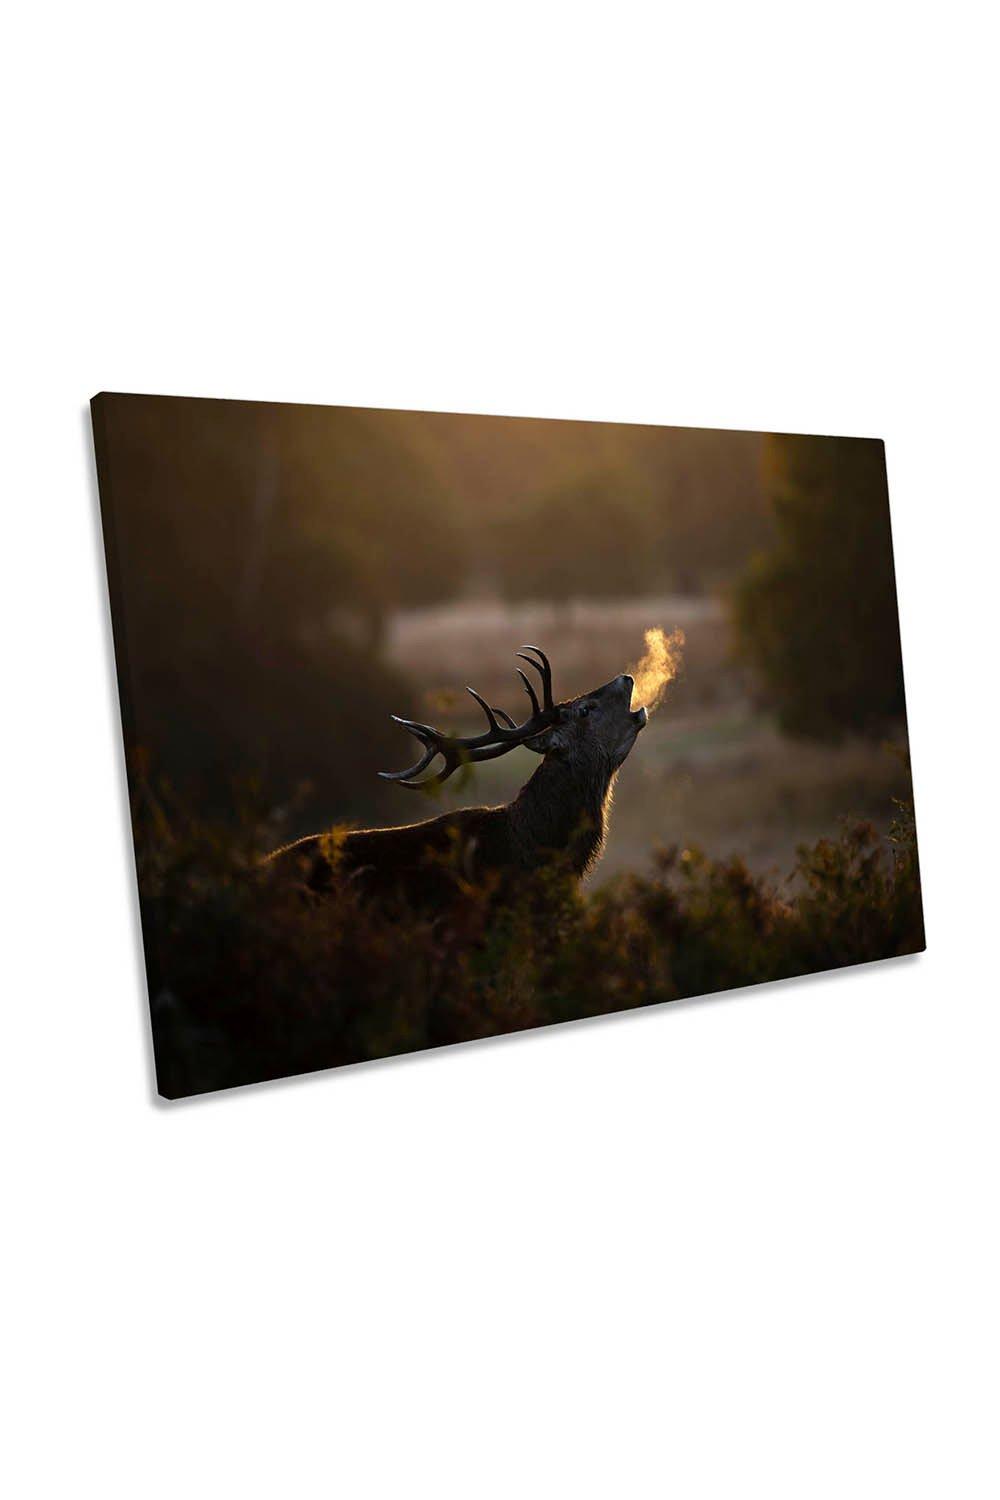 Dragon Breathe Stag Wildlife Deer Canvas Wall Art Picture Print